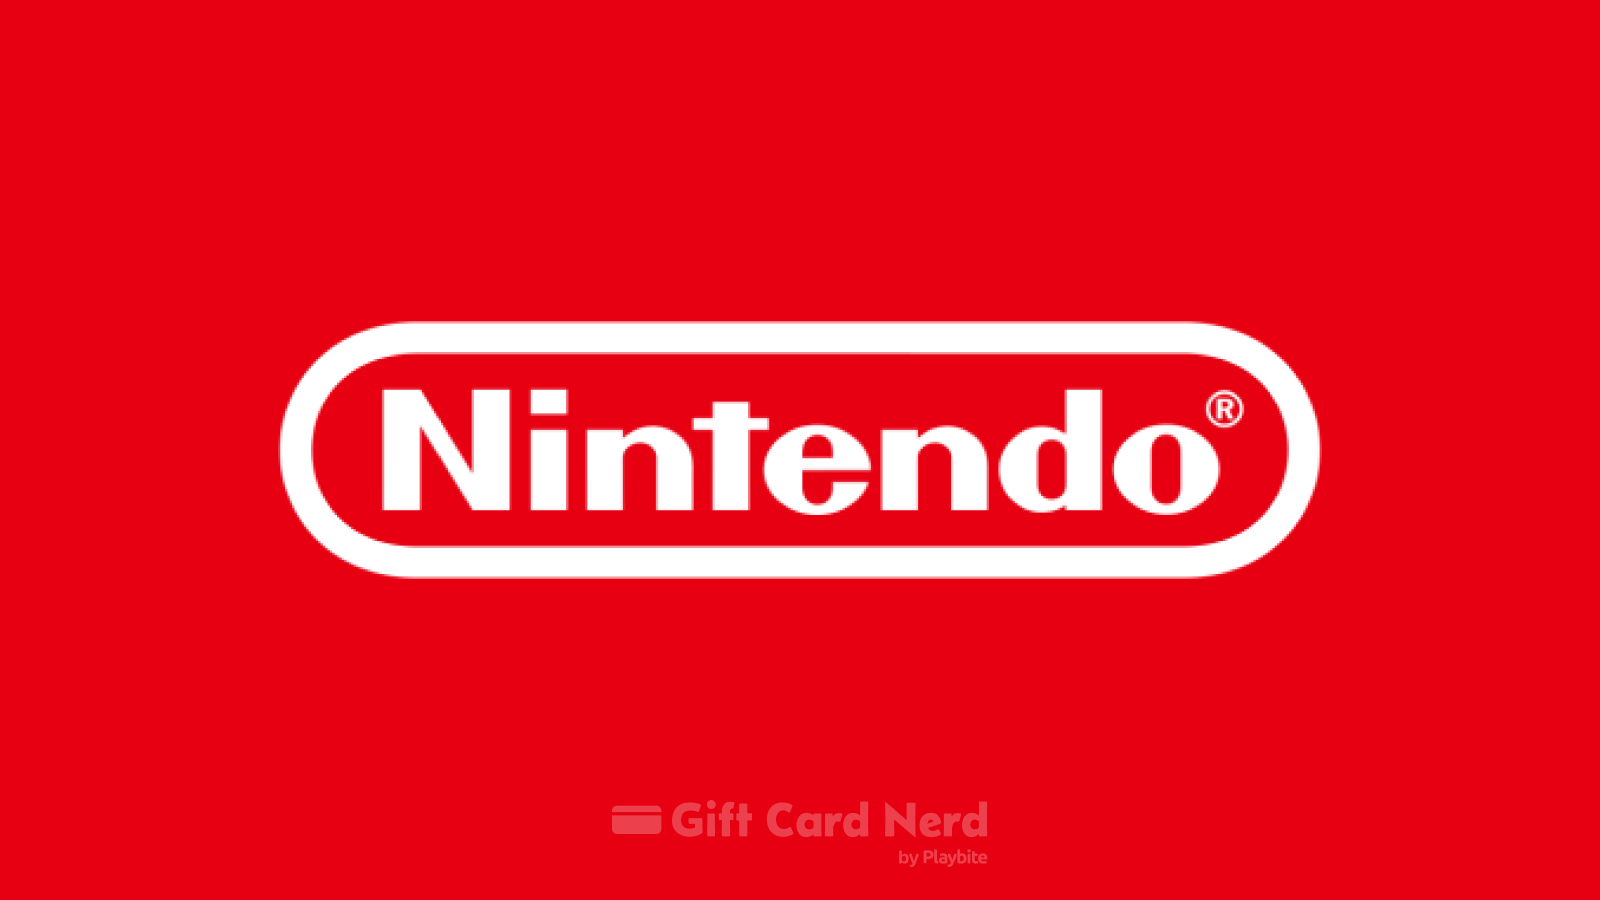 Can You Use a Nintendo Gift Card on Steam?